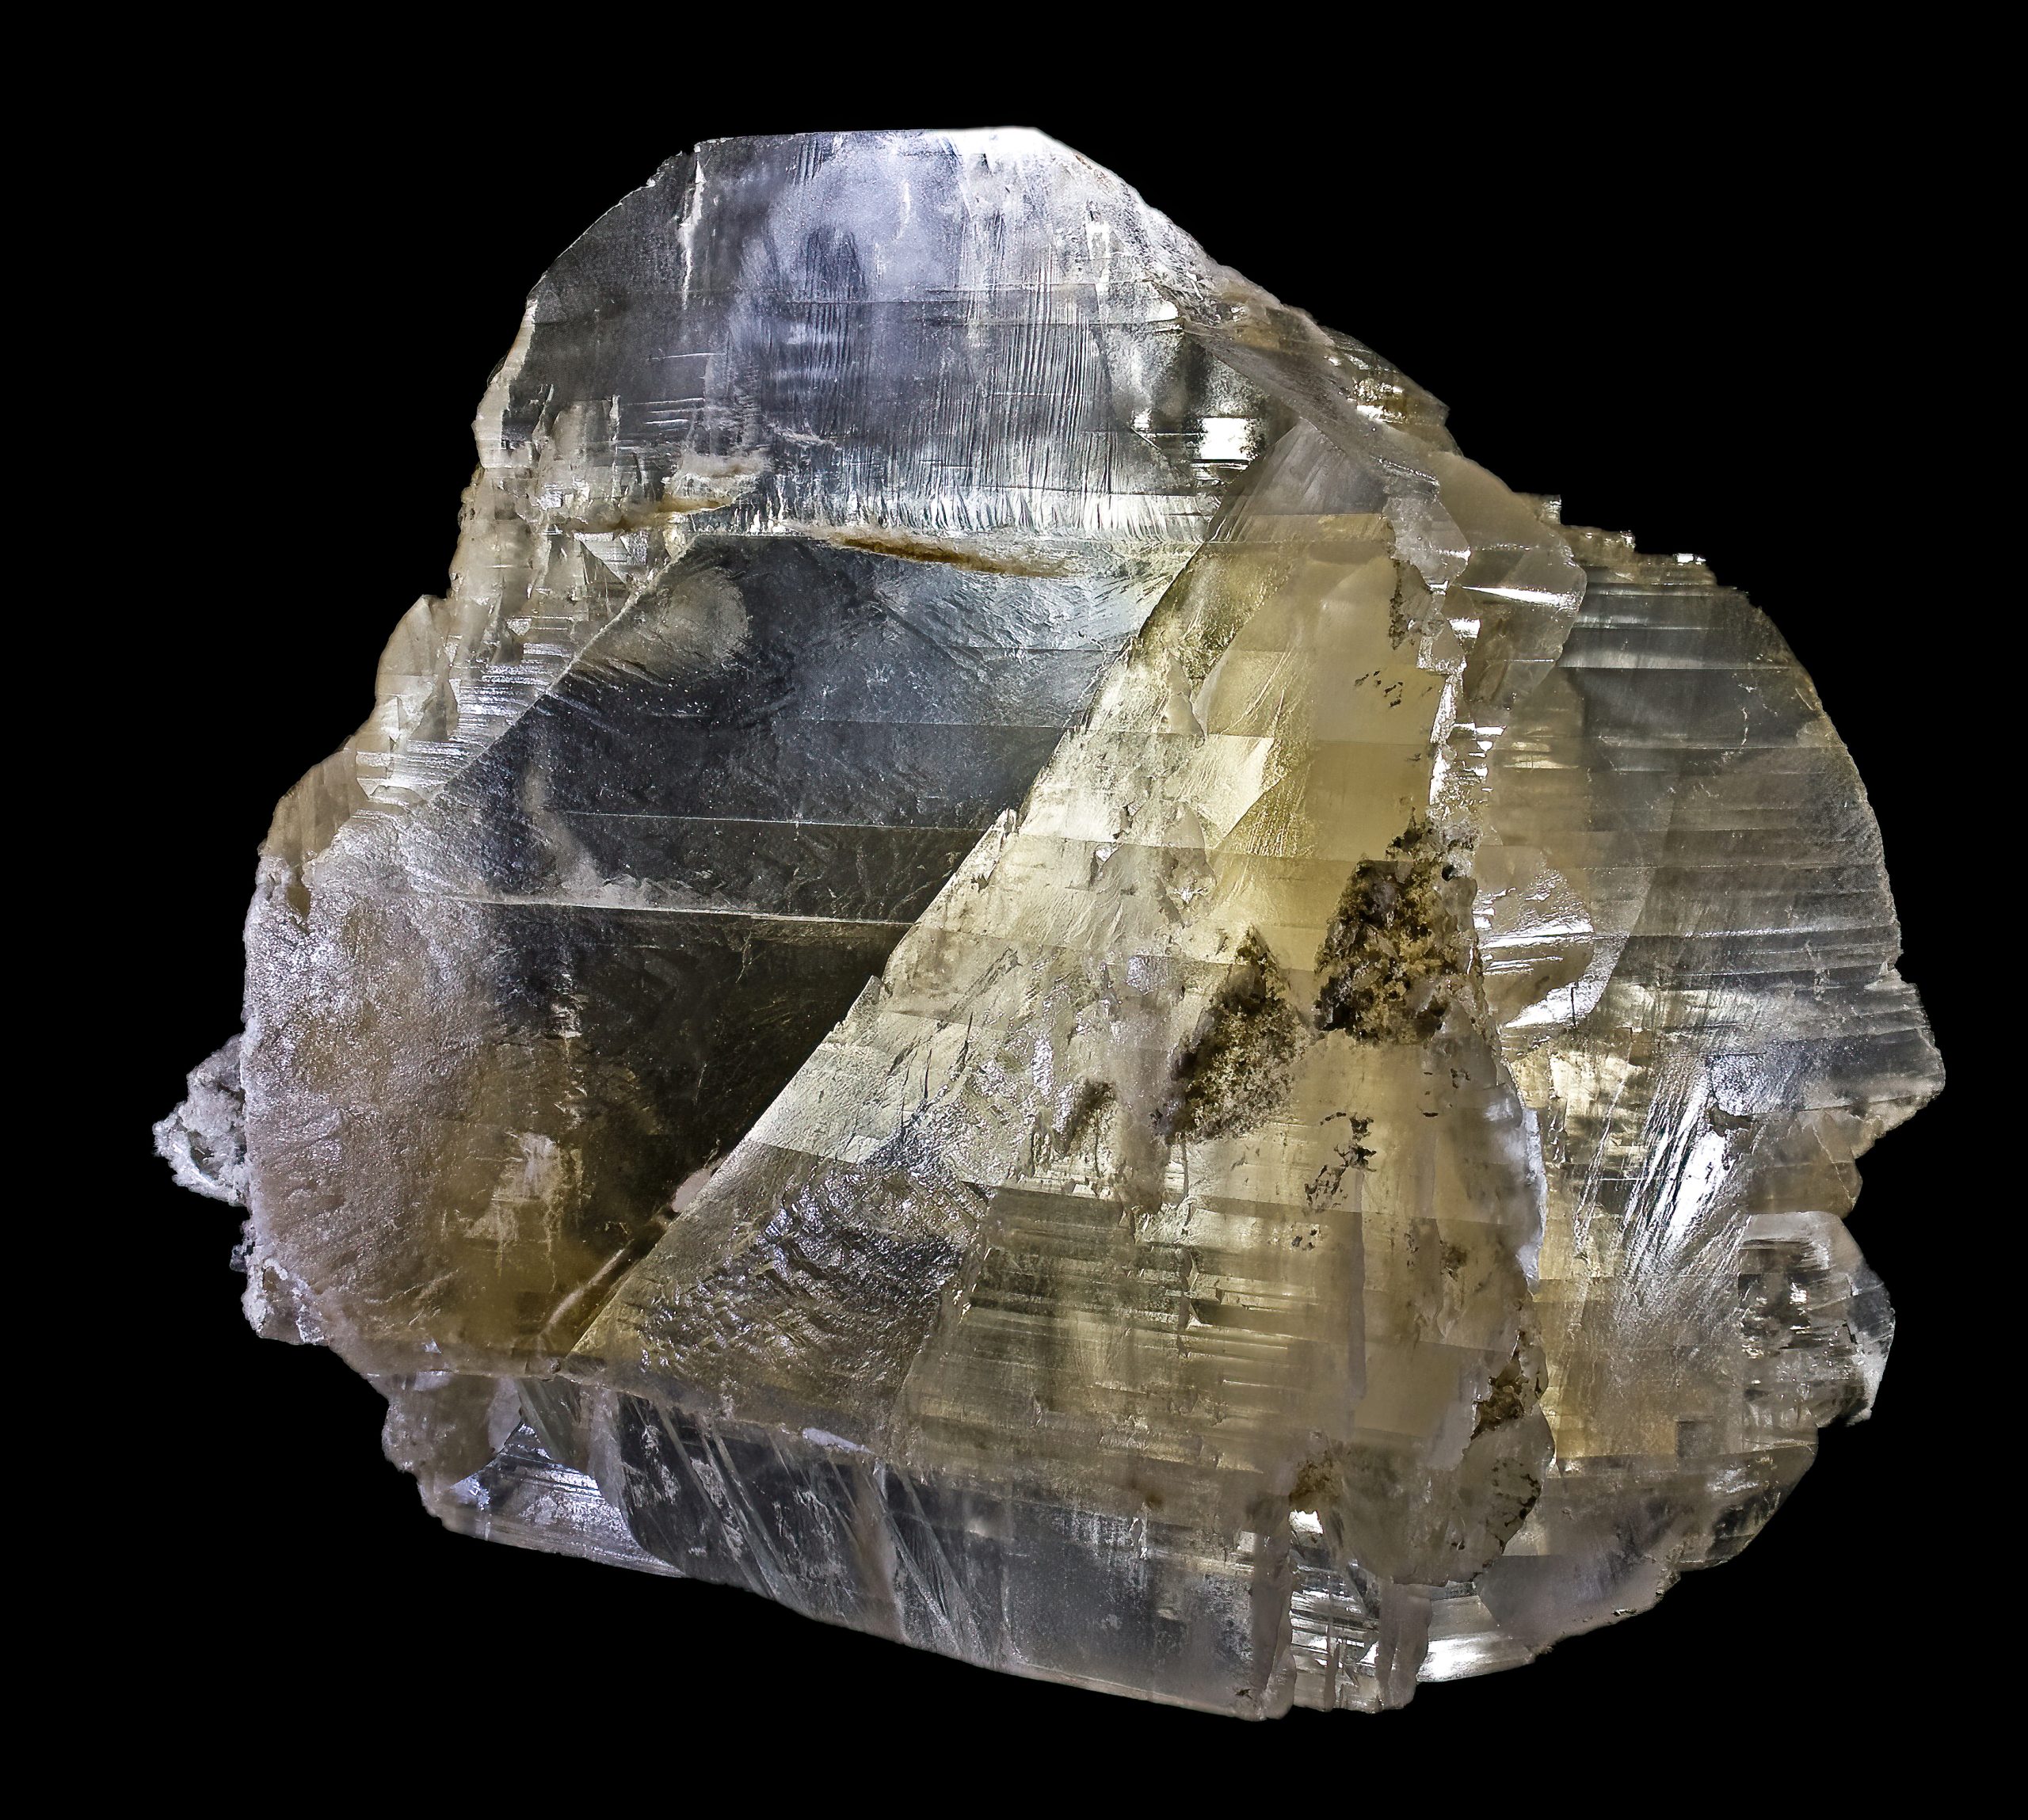 The mineral has many horizontal lines on it